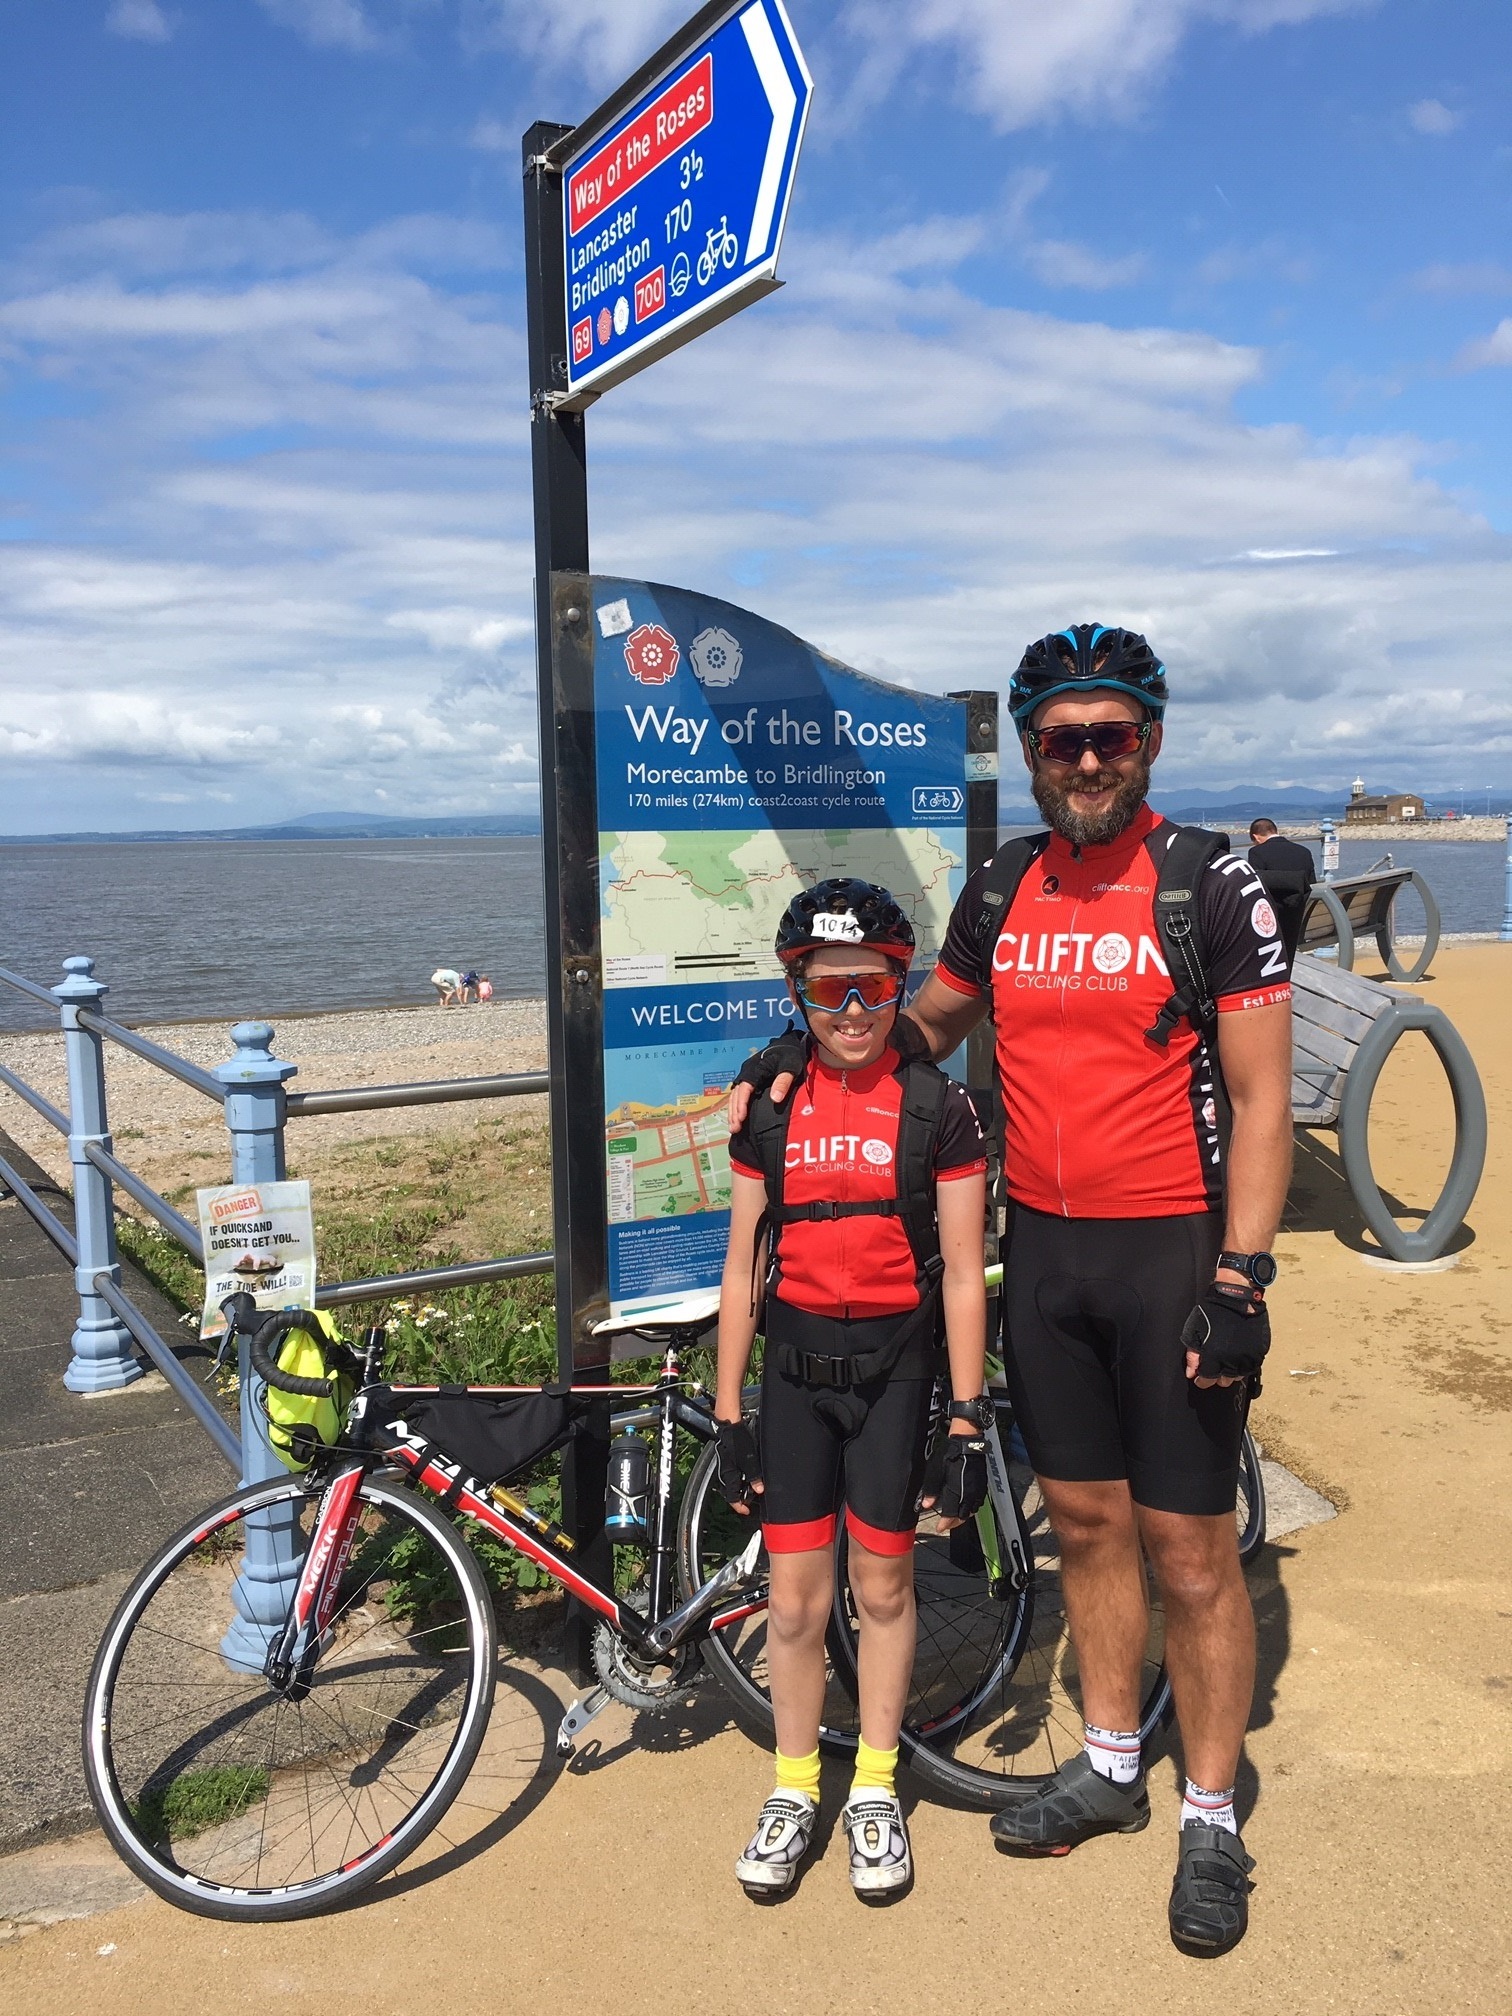 charity cycle rides